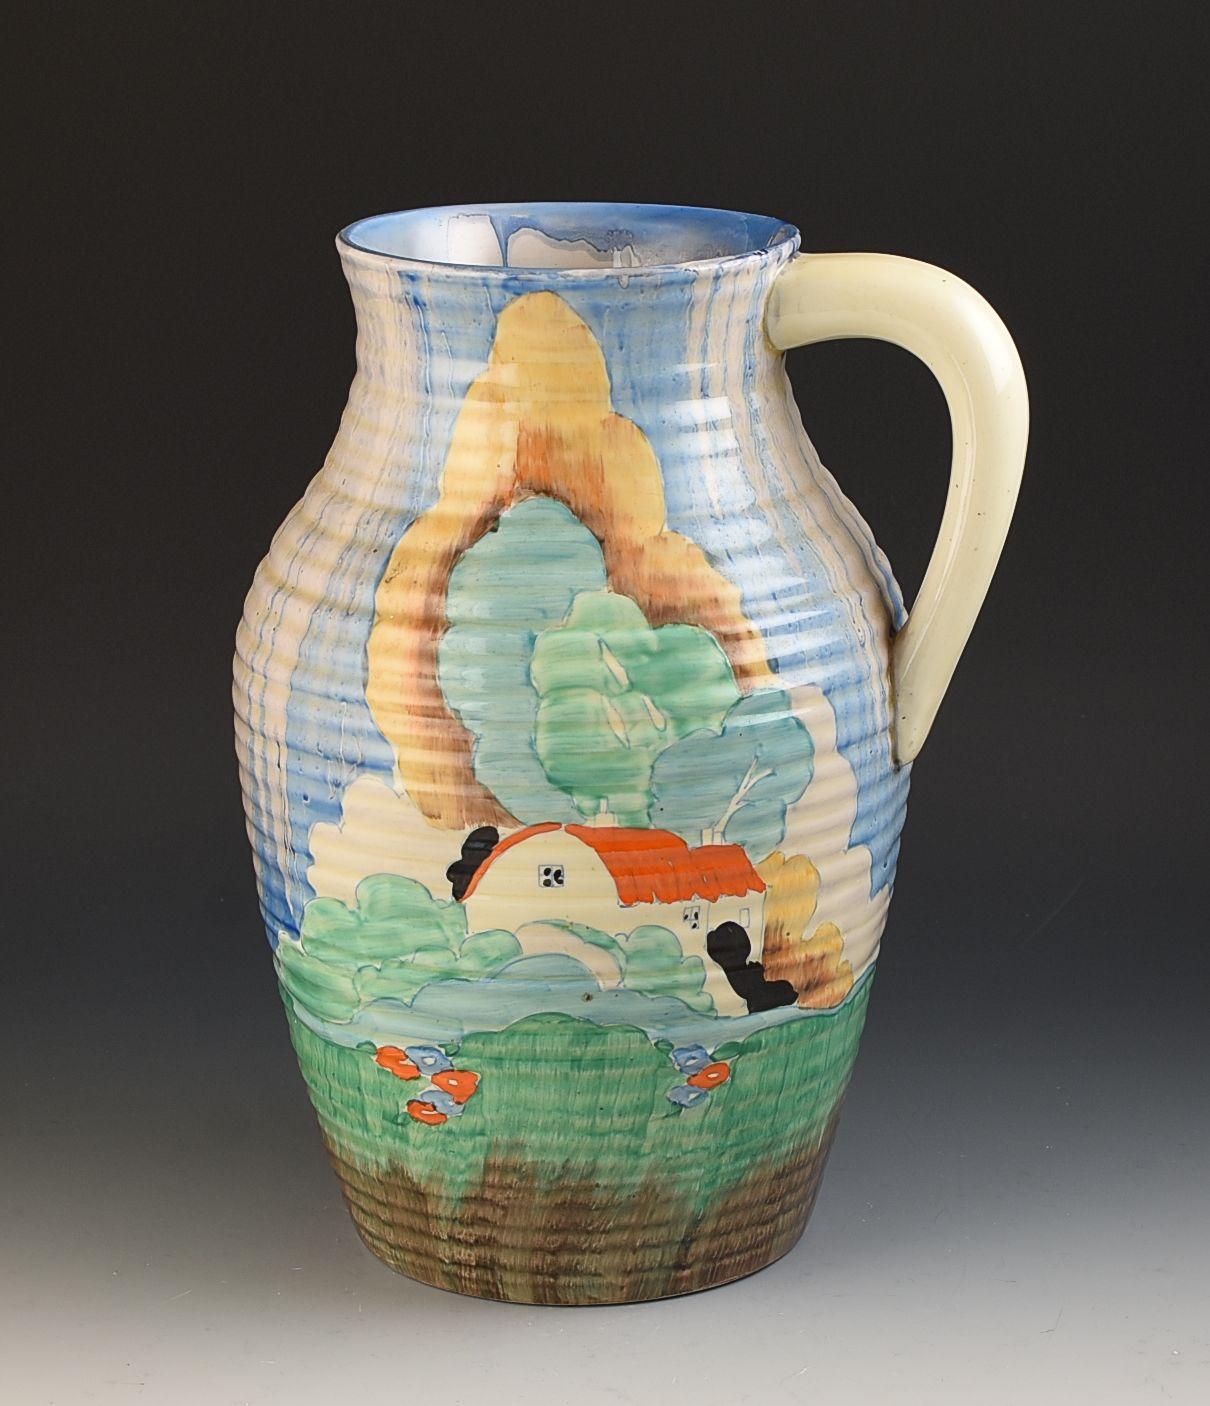 A beautiful and rare Lotus jug in the Newlyn design. This will date to 1934 and is only the second one i've seen of these in 34 years of dealing in Clarice cliff pottery. Really nicely decorated showing a full version of the pattern. GUARANTEED to